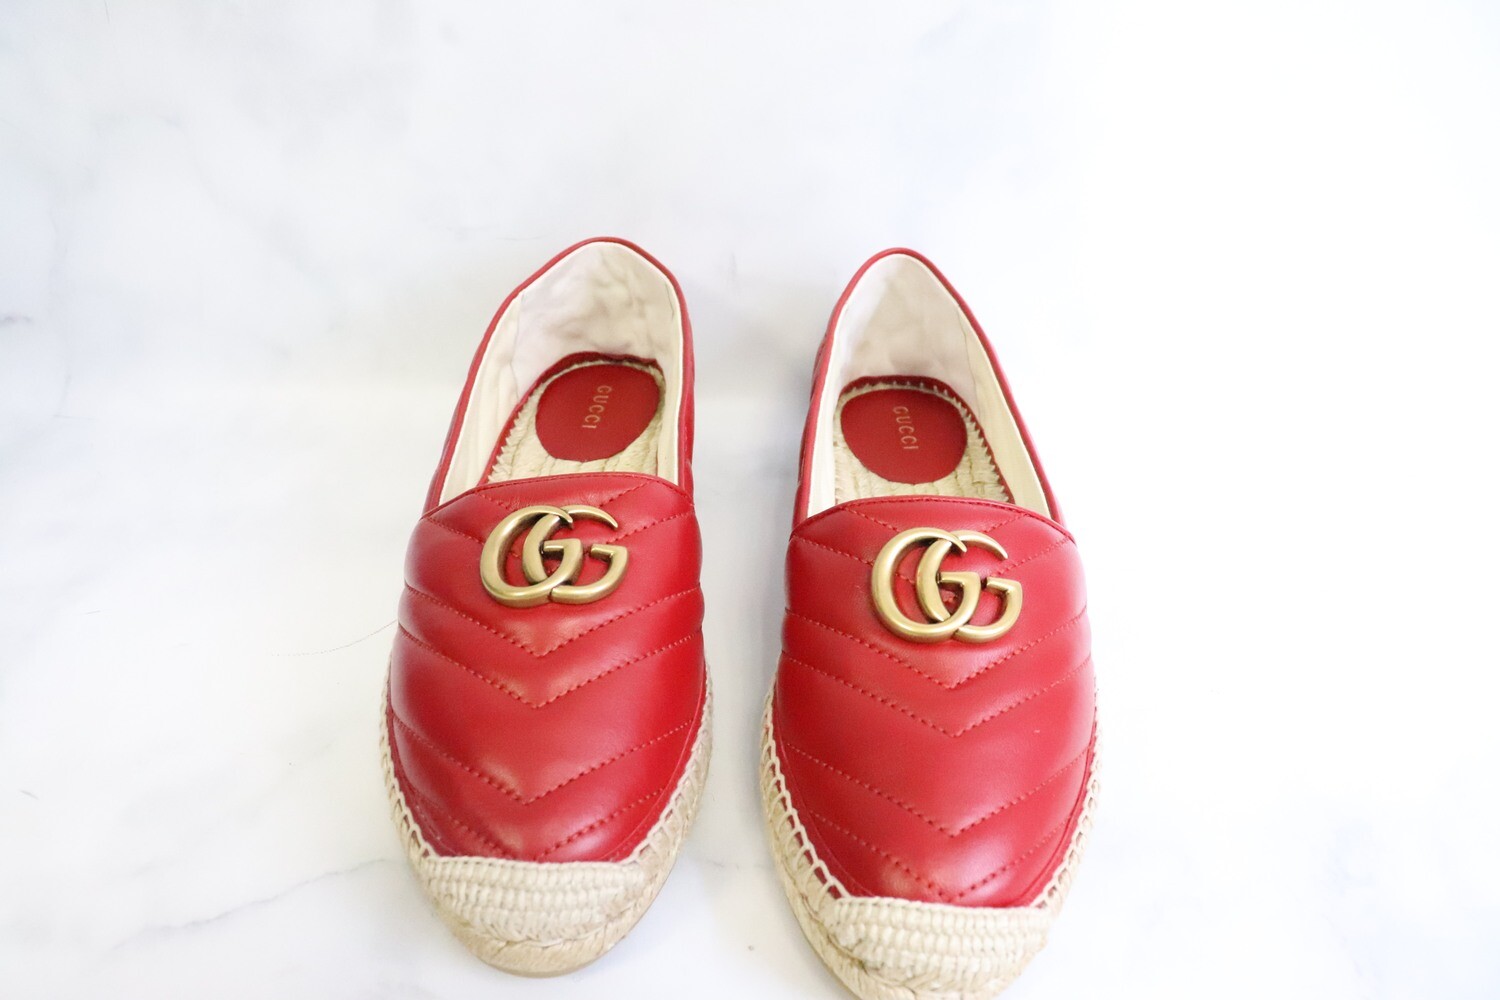 Gucci Marmont Espadrilles, Hibiscus Red, Size 39.5, New in Box MA001